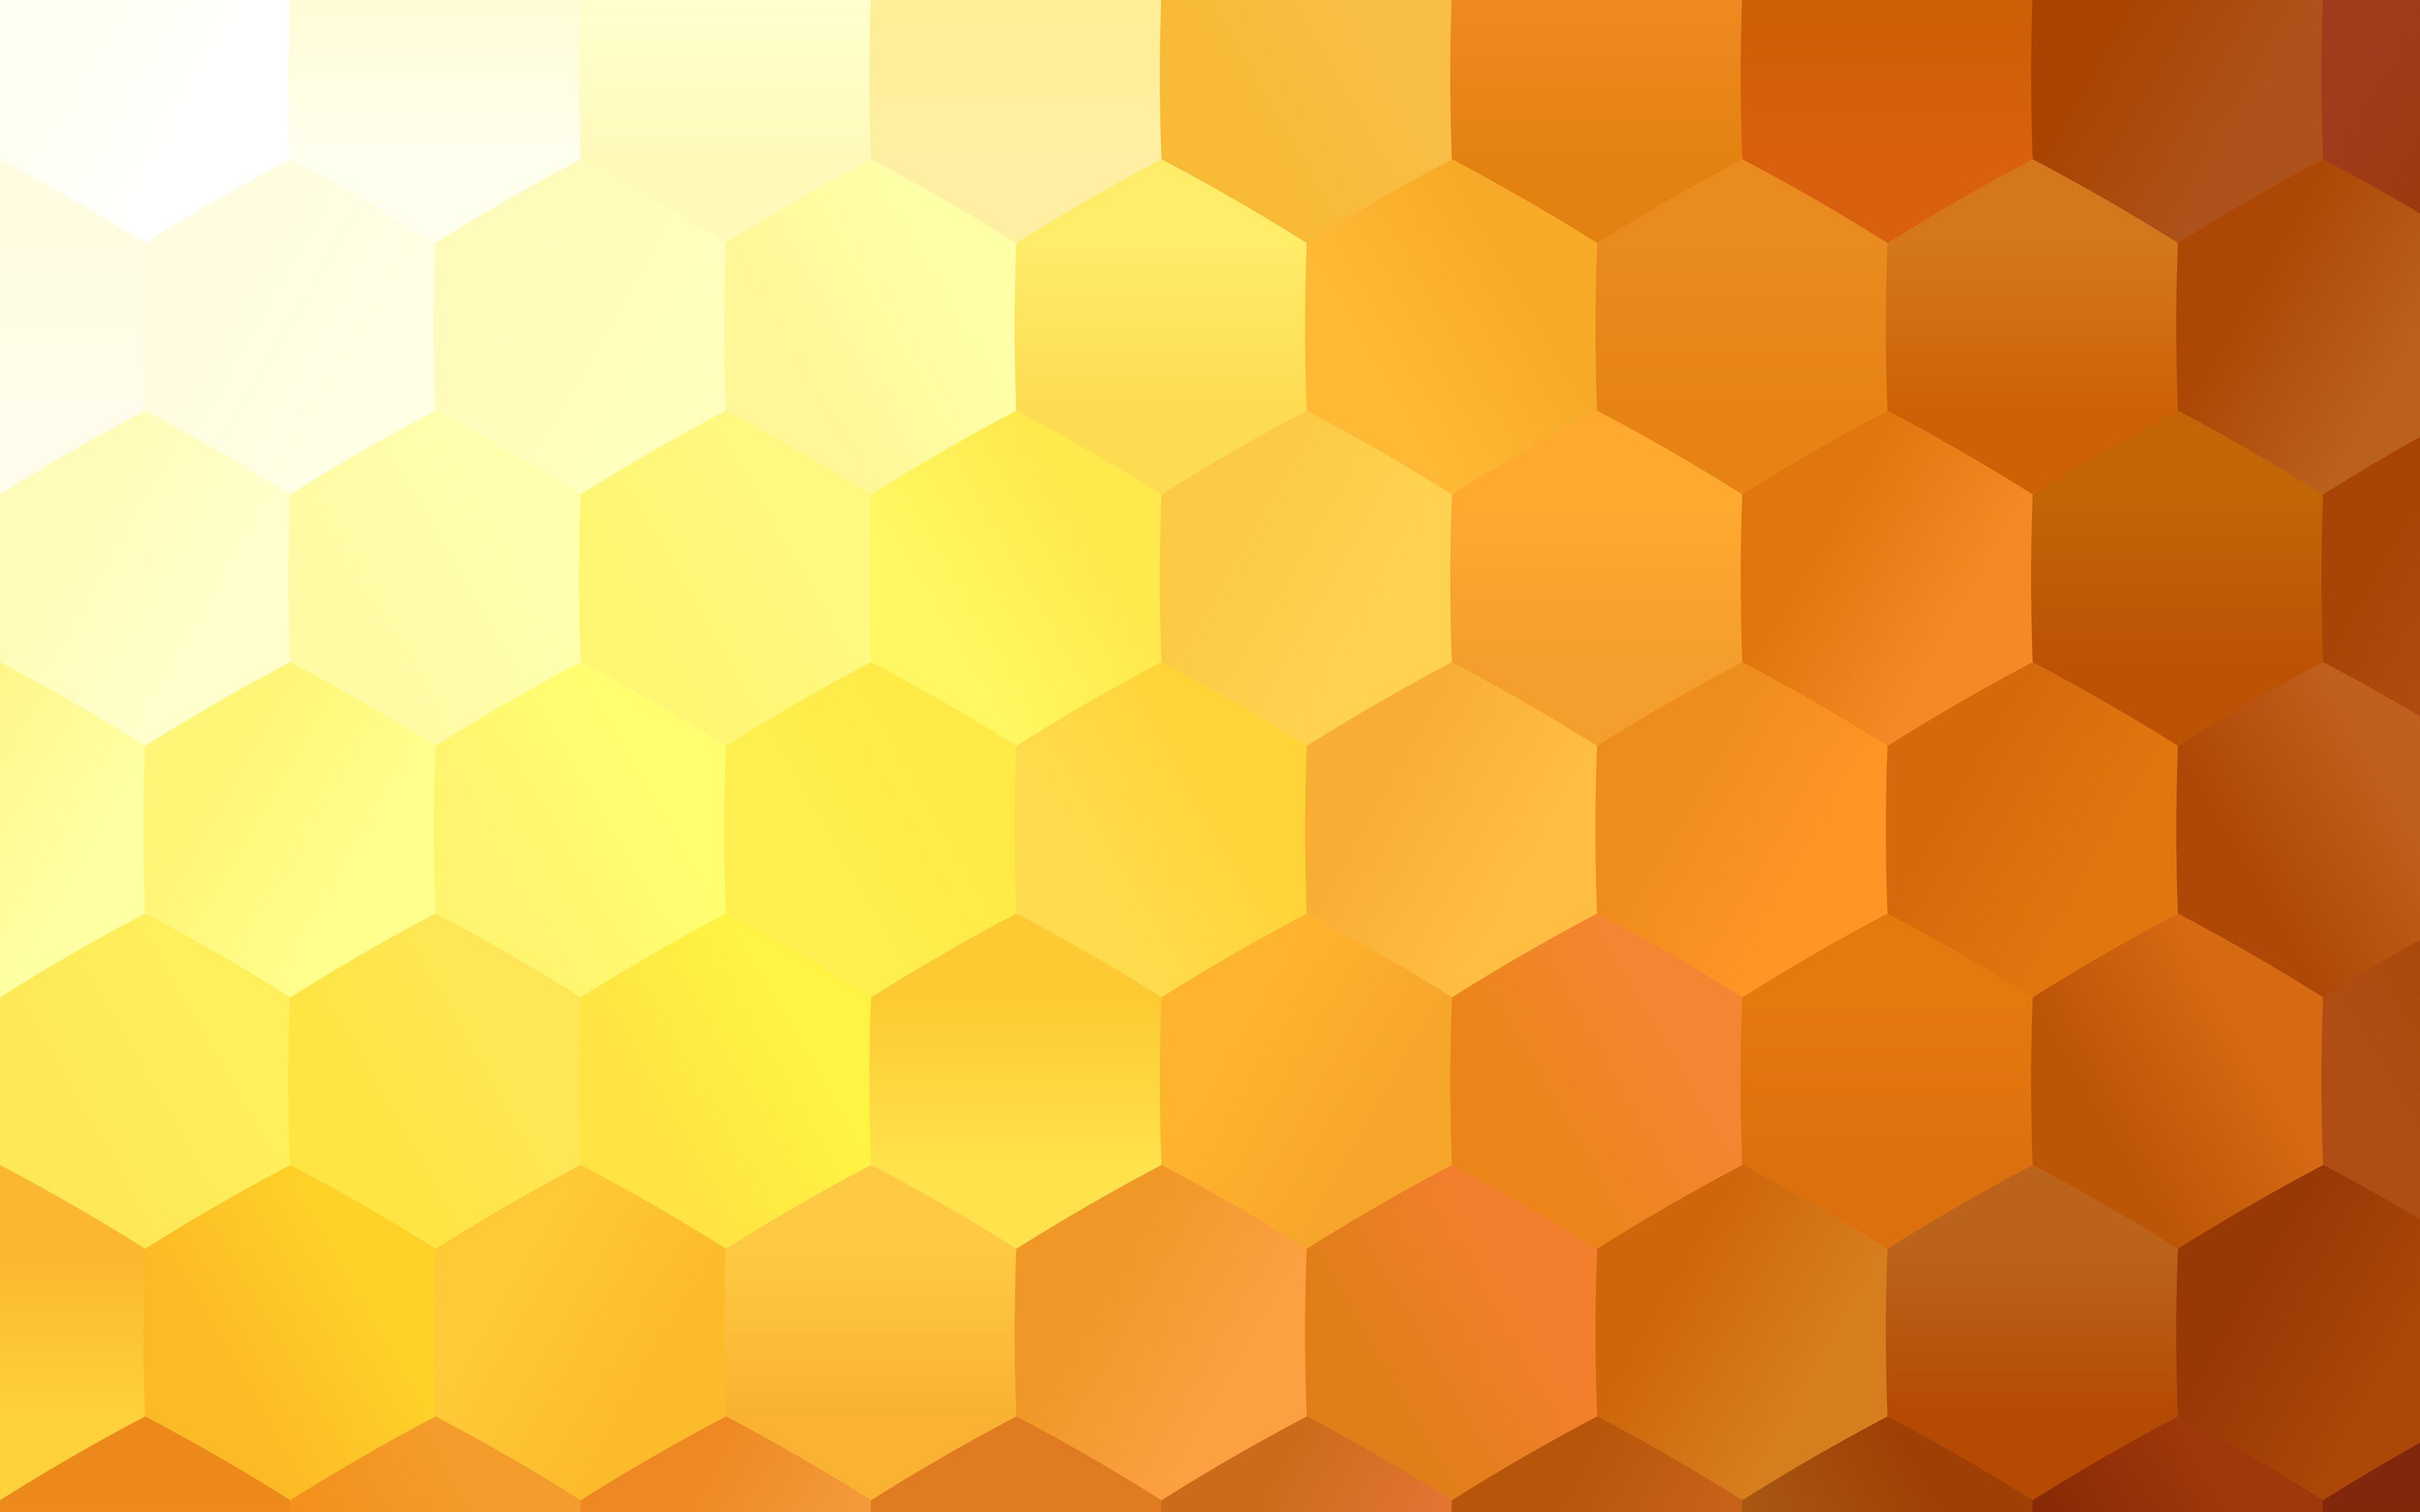 Download wallpapers yellow hexagons, 4k, hexagons 3D texture, honeycomb,  hexagons patterns, hexagons textures, 3D textures, yellow backgrounds for  desktop with resolution 3840x2400. High Quality HD pictures wallpapers